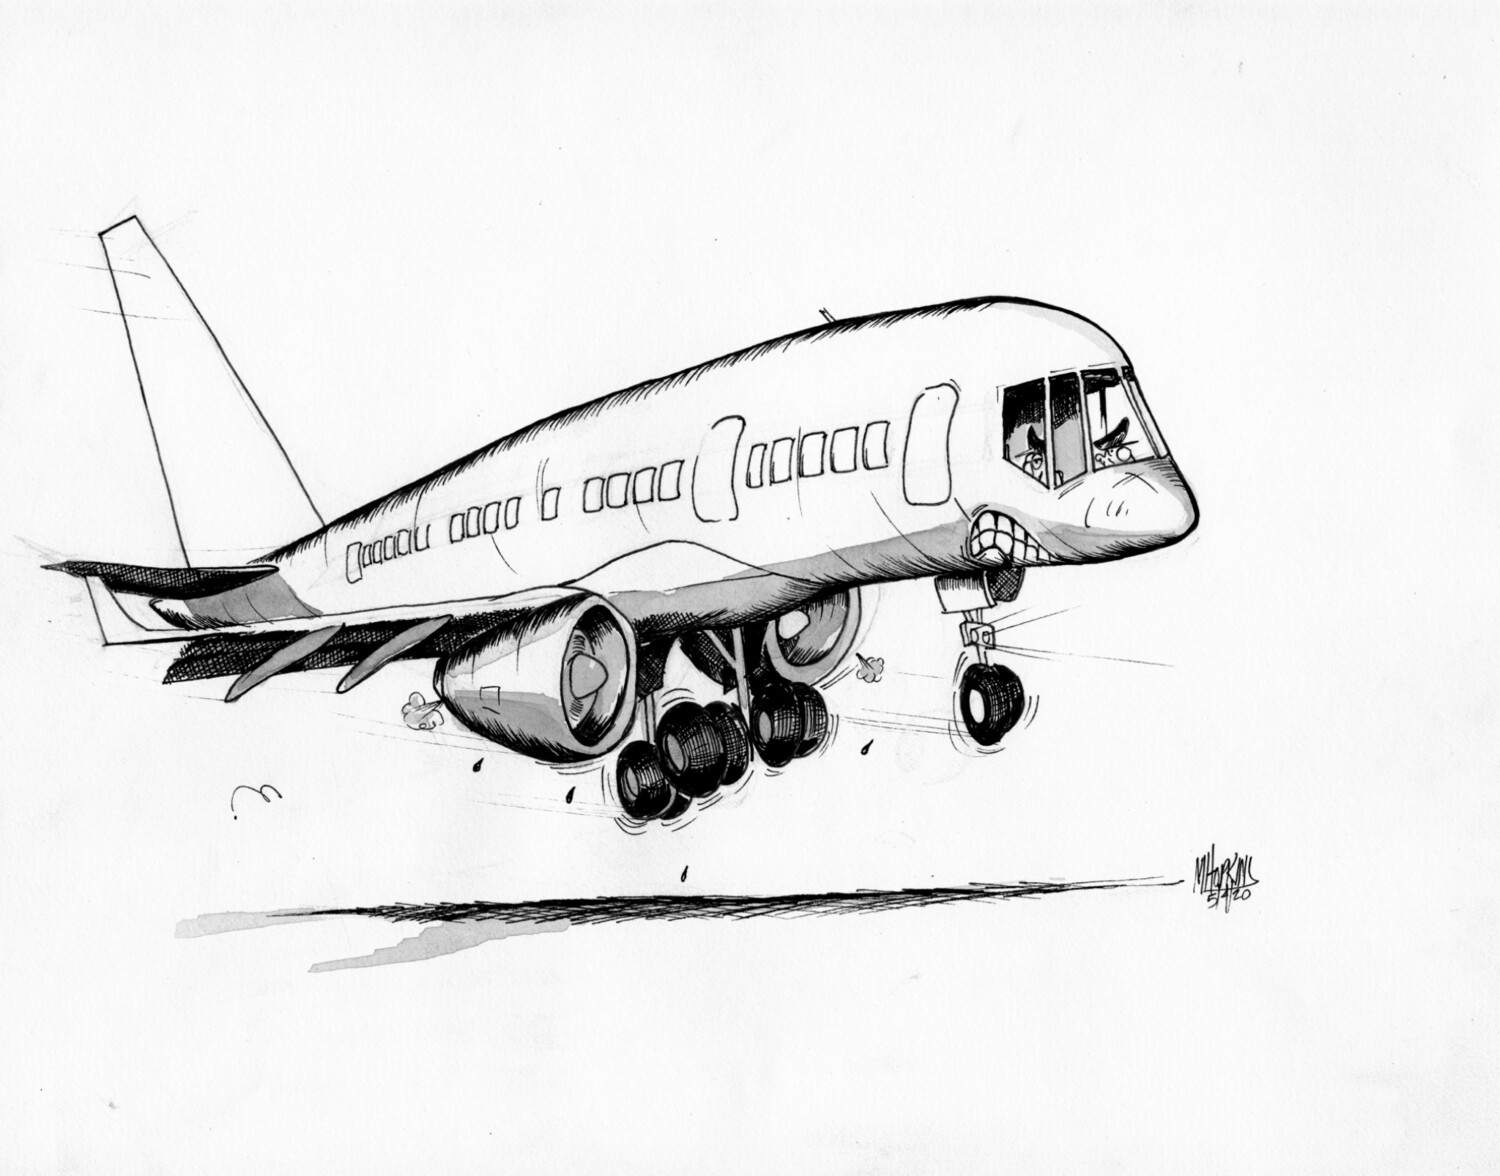 Boeing 757 - Limited Edition Signed Giclée Prints from $50.00 to $200.00